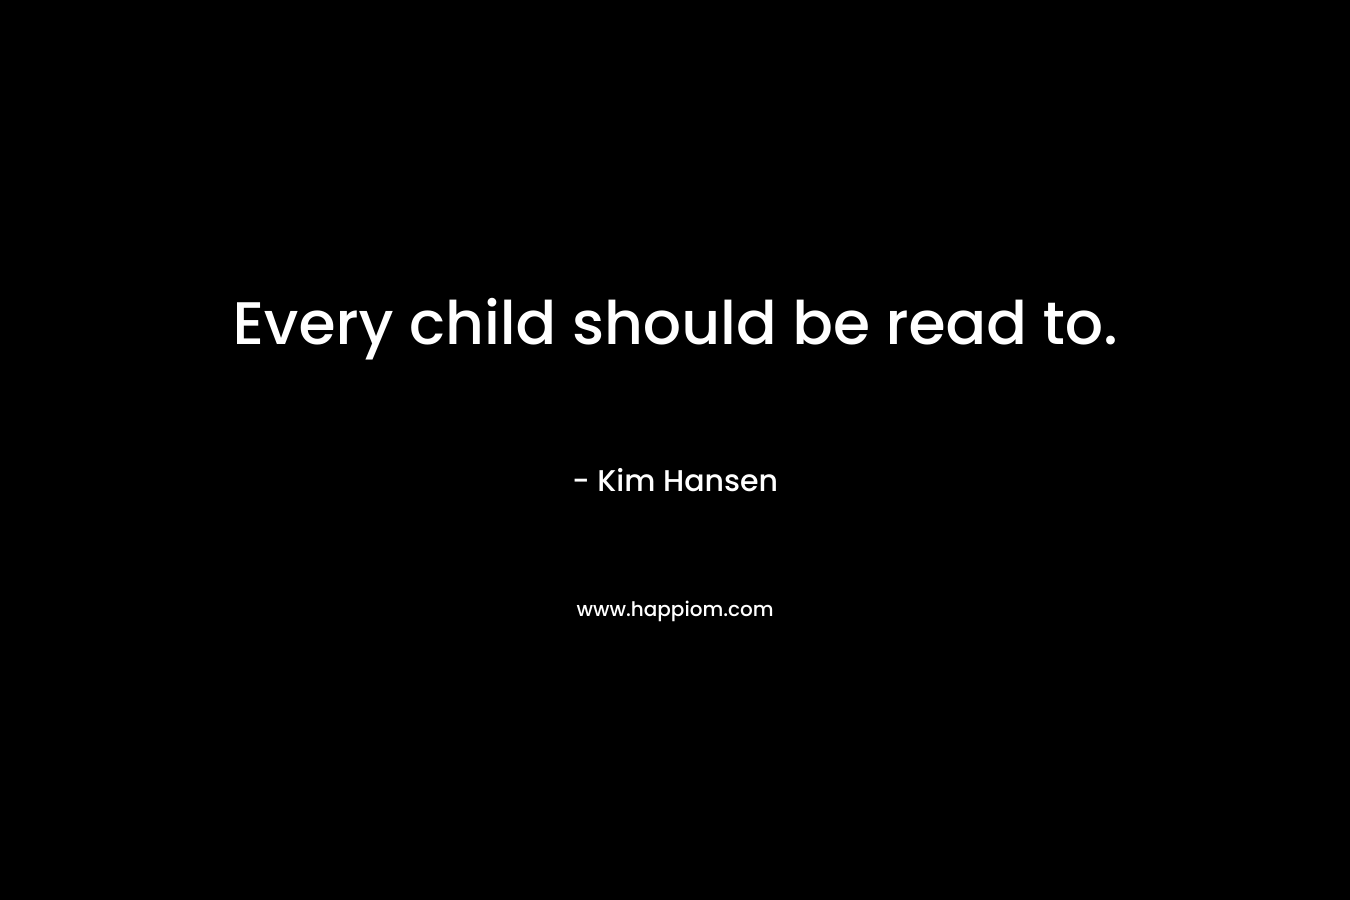 Every child should be read to. – Kim Hansen